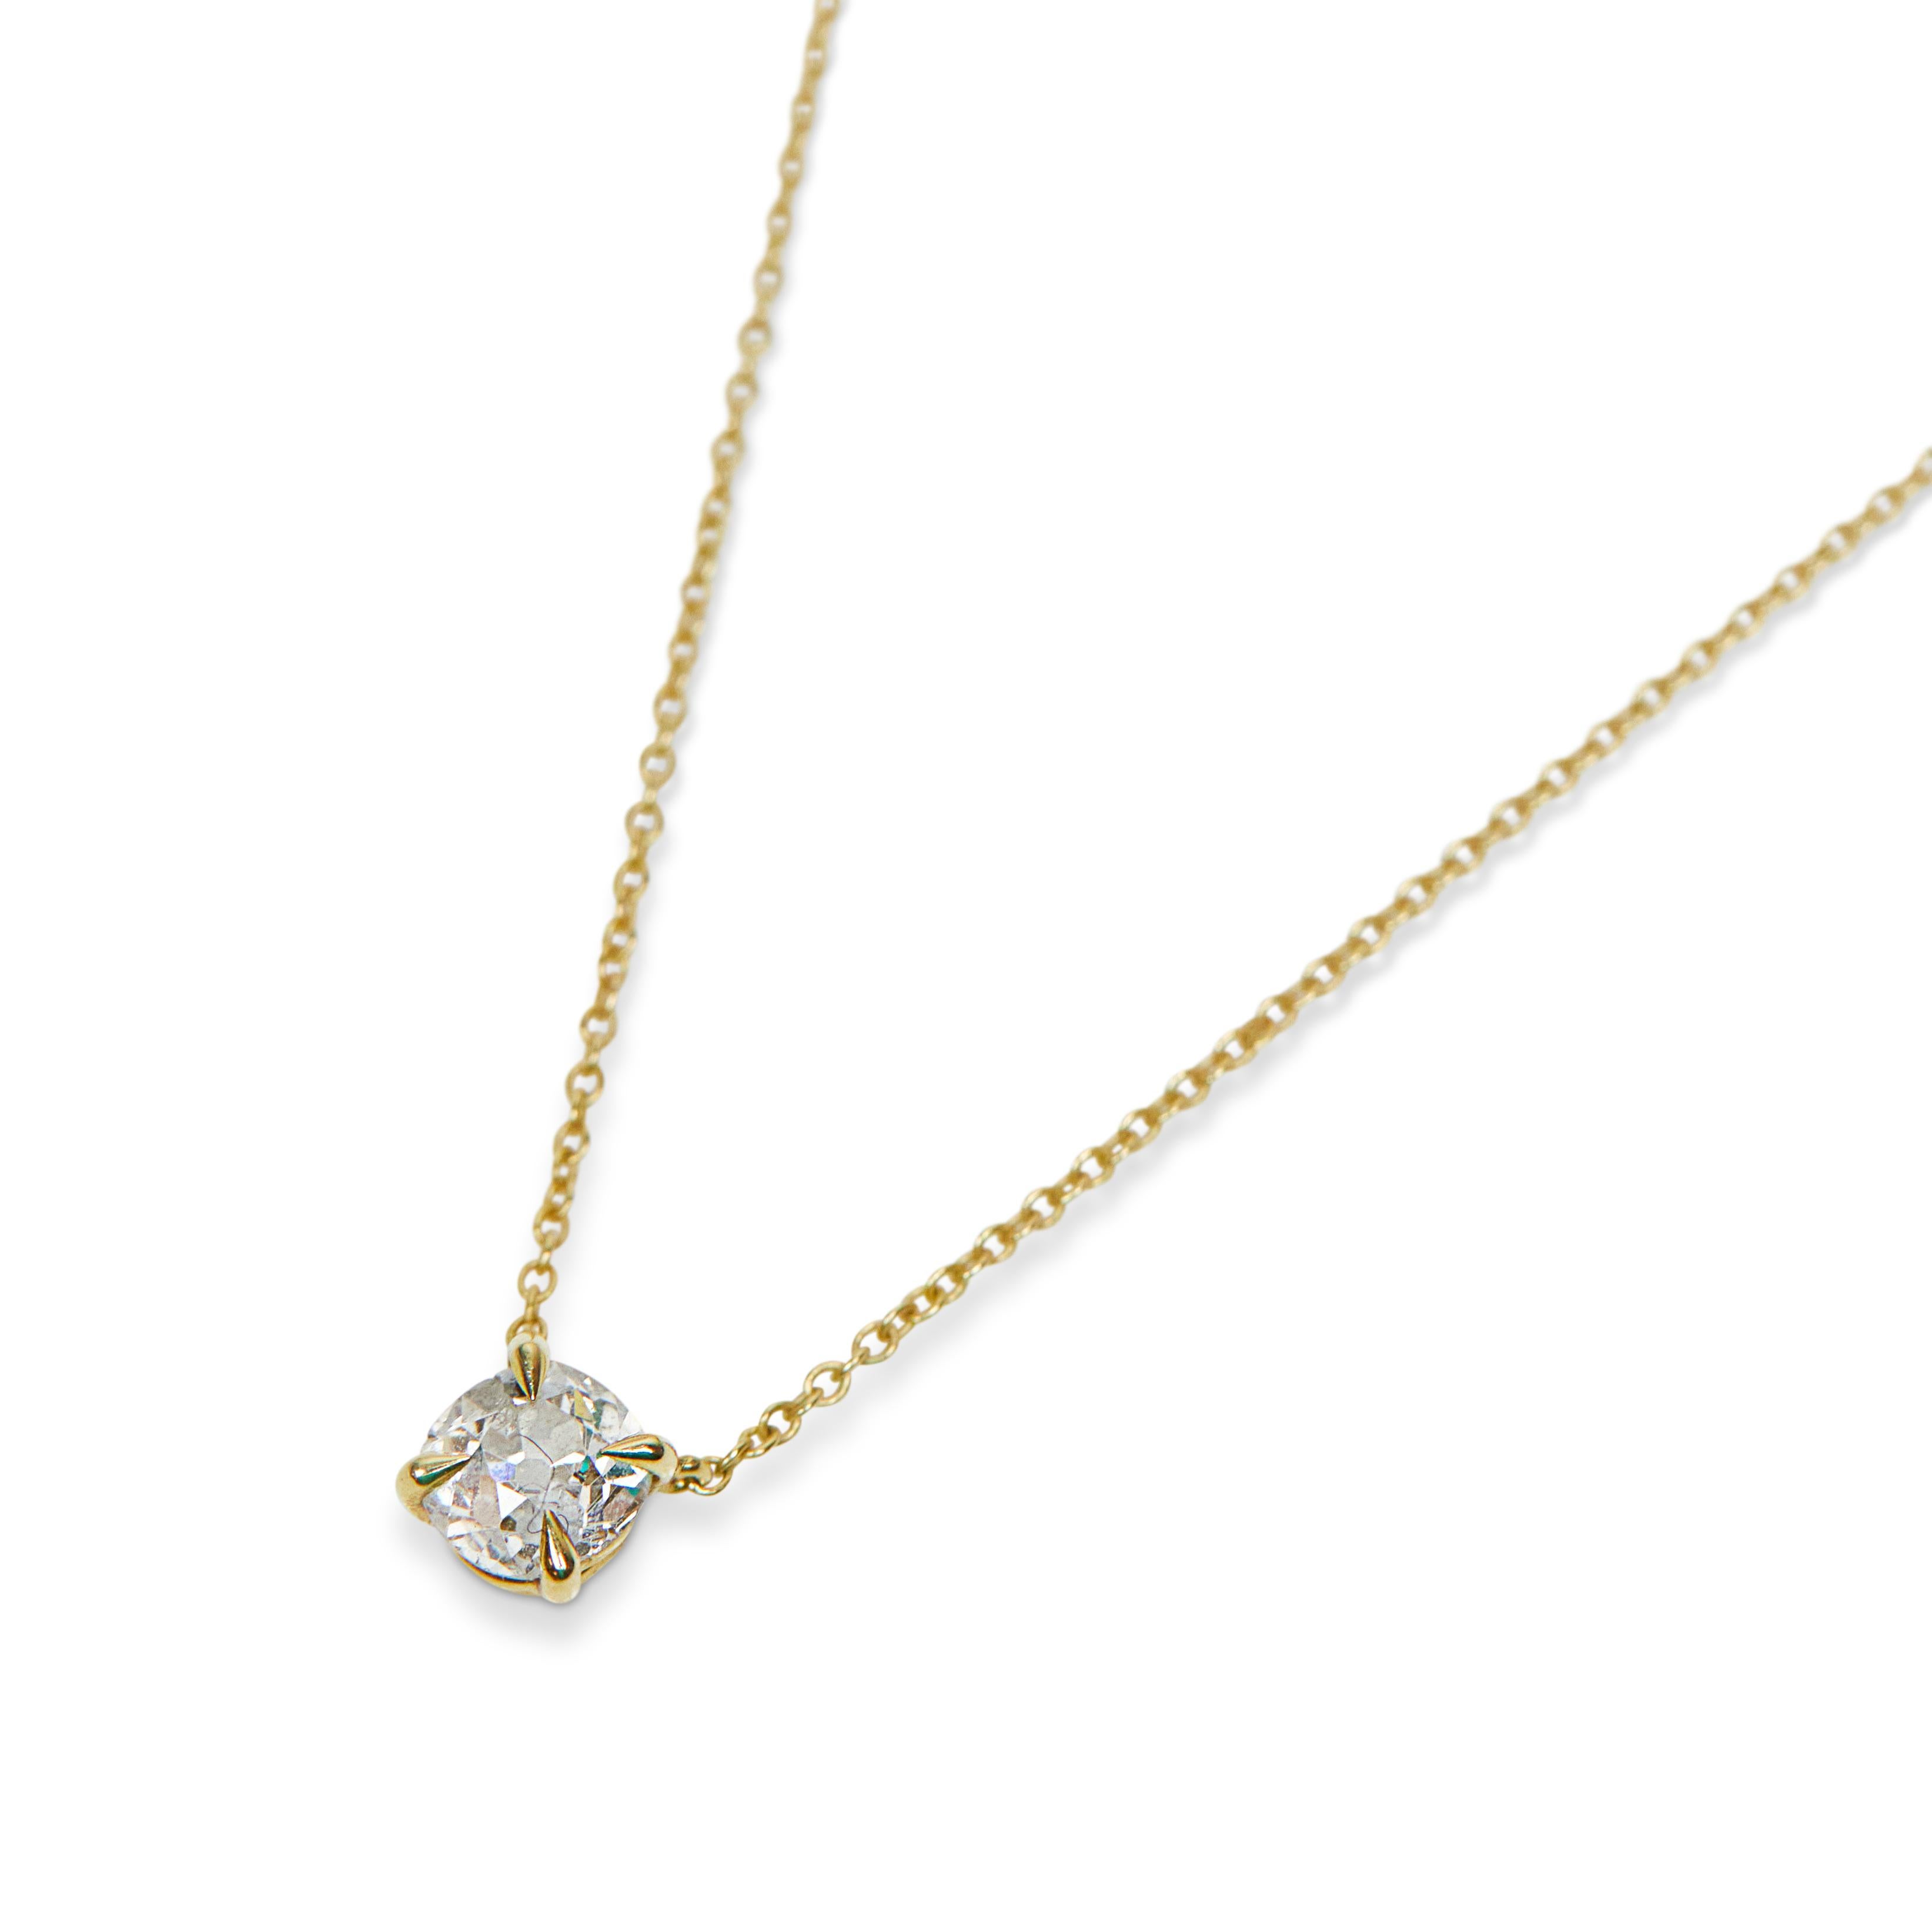 Stone
- Diamond
- Shape: Round Brilliant Cut
- Carat weight: 0.70
- Colour: Salt & pepper

Setting
- 18ct yellow gold
- 16 inch necklace chain

Shipping Information:
This necklace is ready to ship and can be delivered within 5 working days
If you